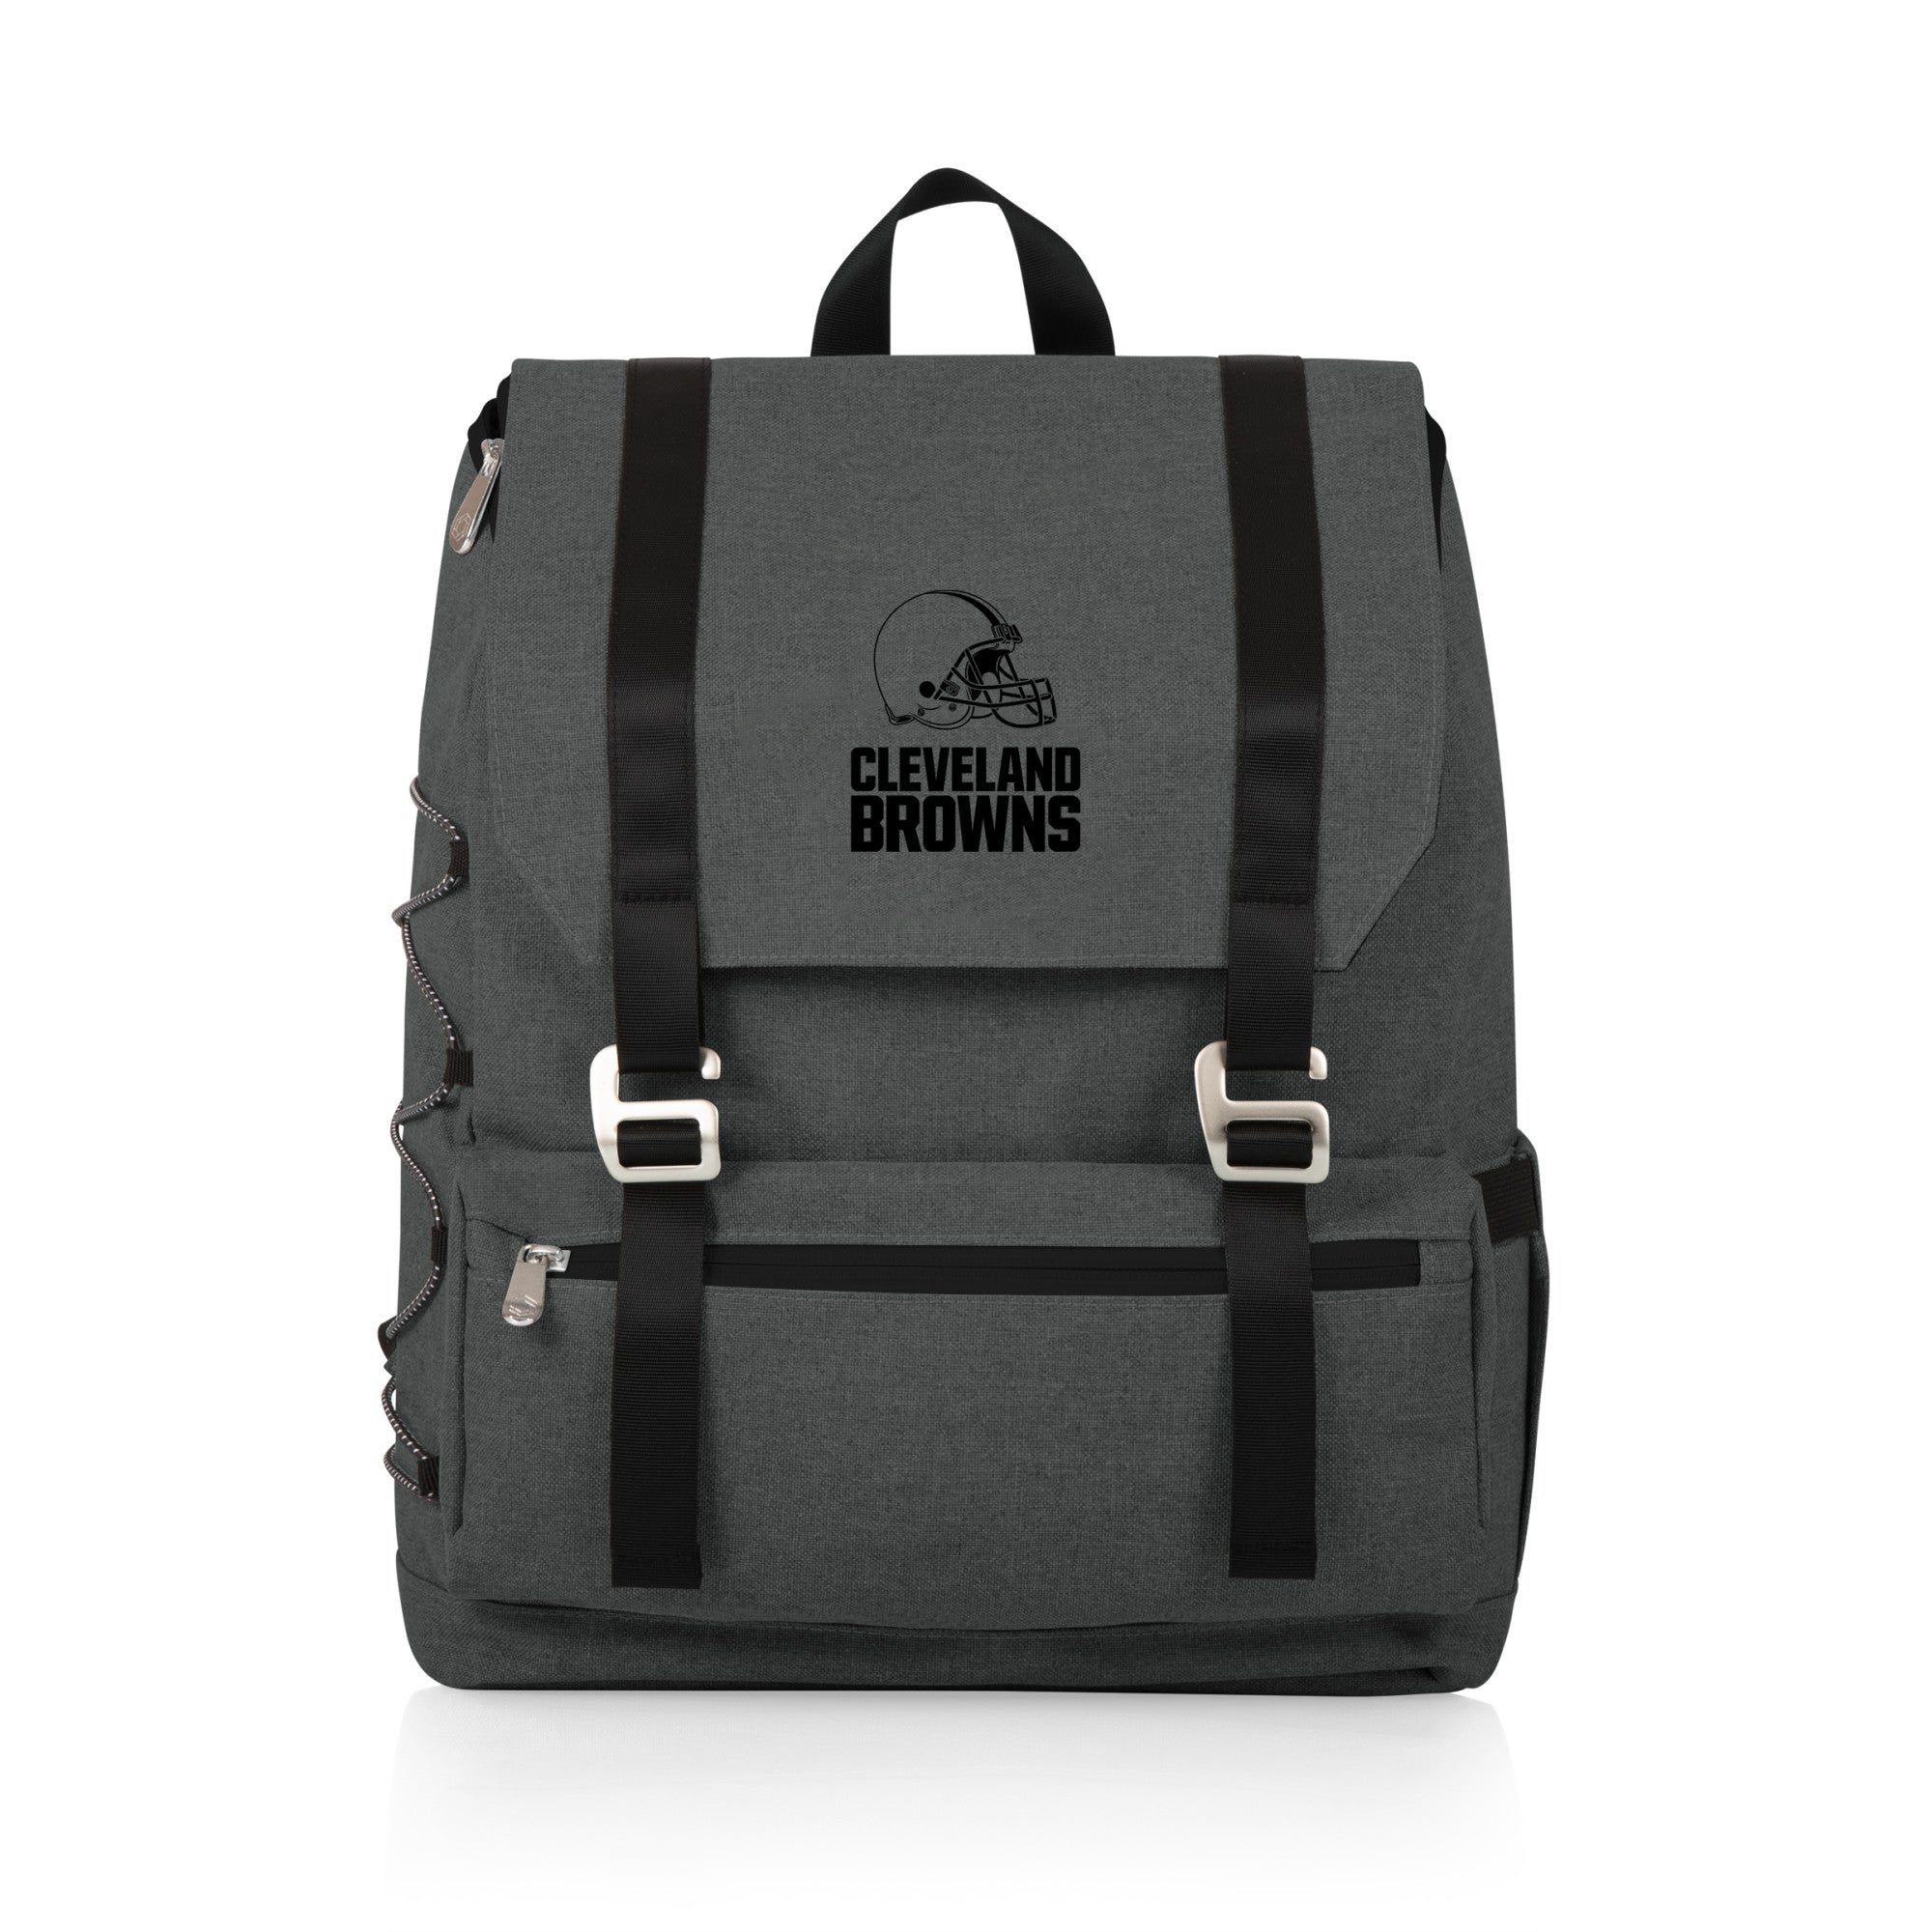 Cleveland Browns - On The Go Traverse Backpack Cooler